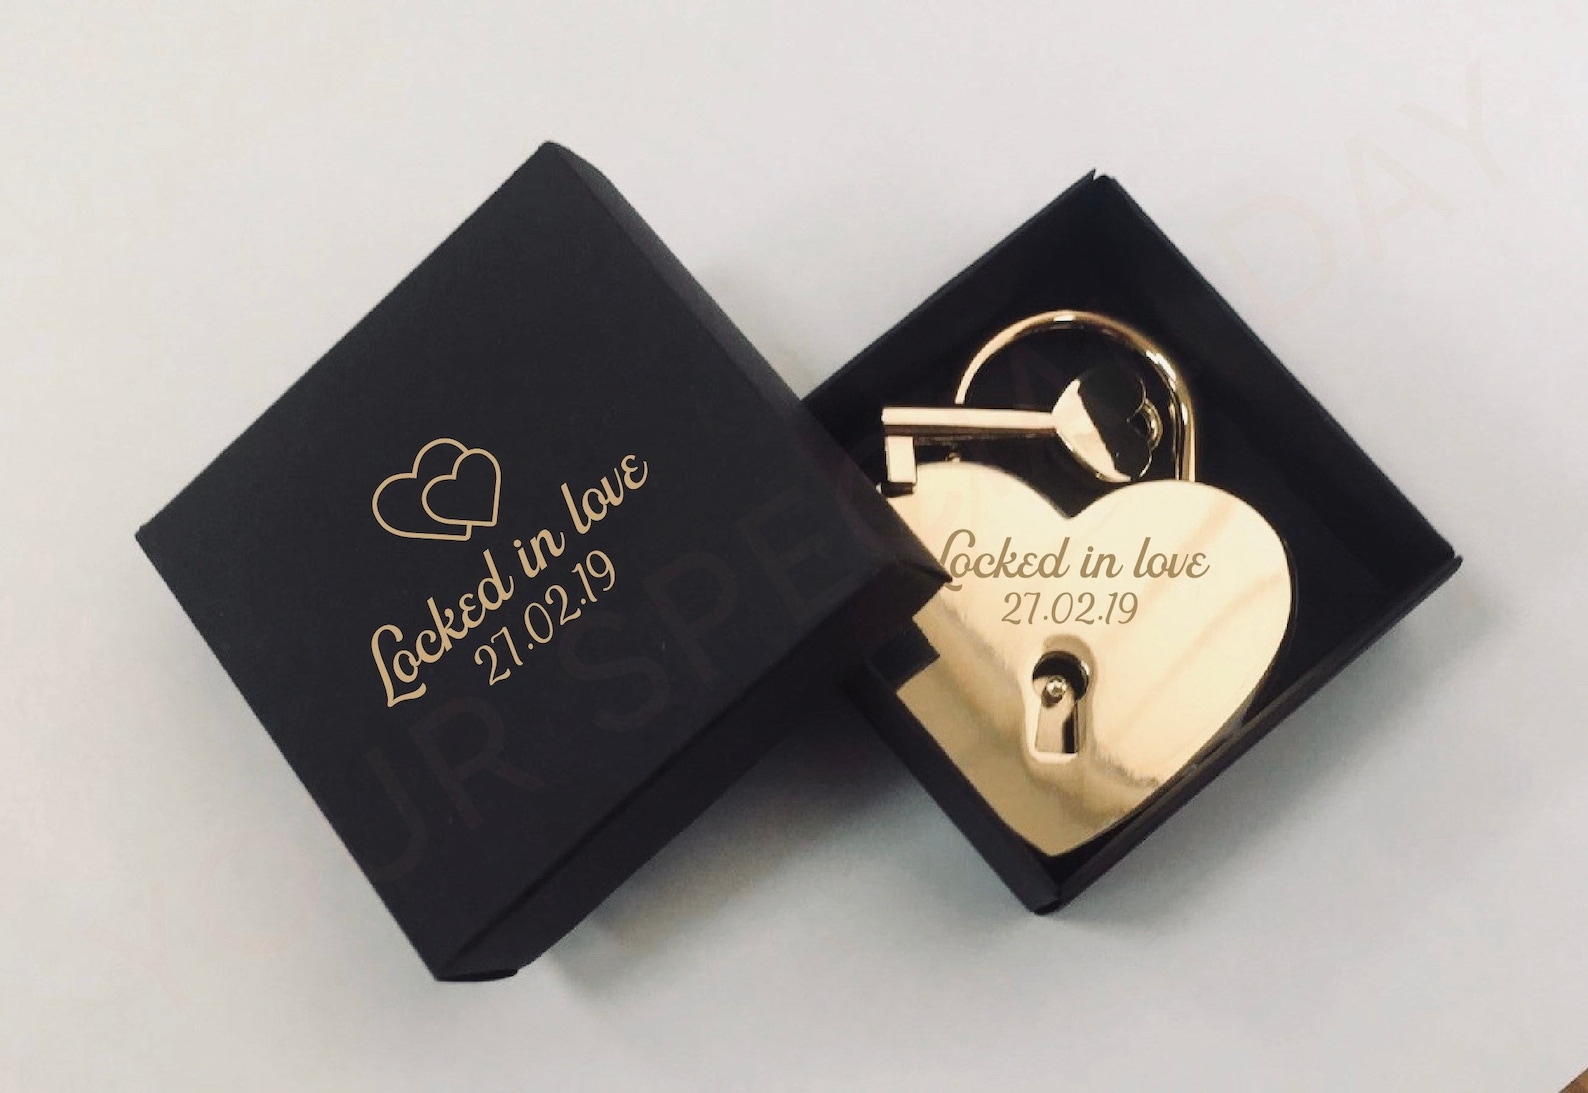 The love lock with your own personalized engraved message for a lasting remembrance.